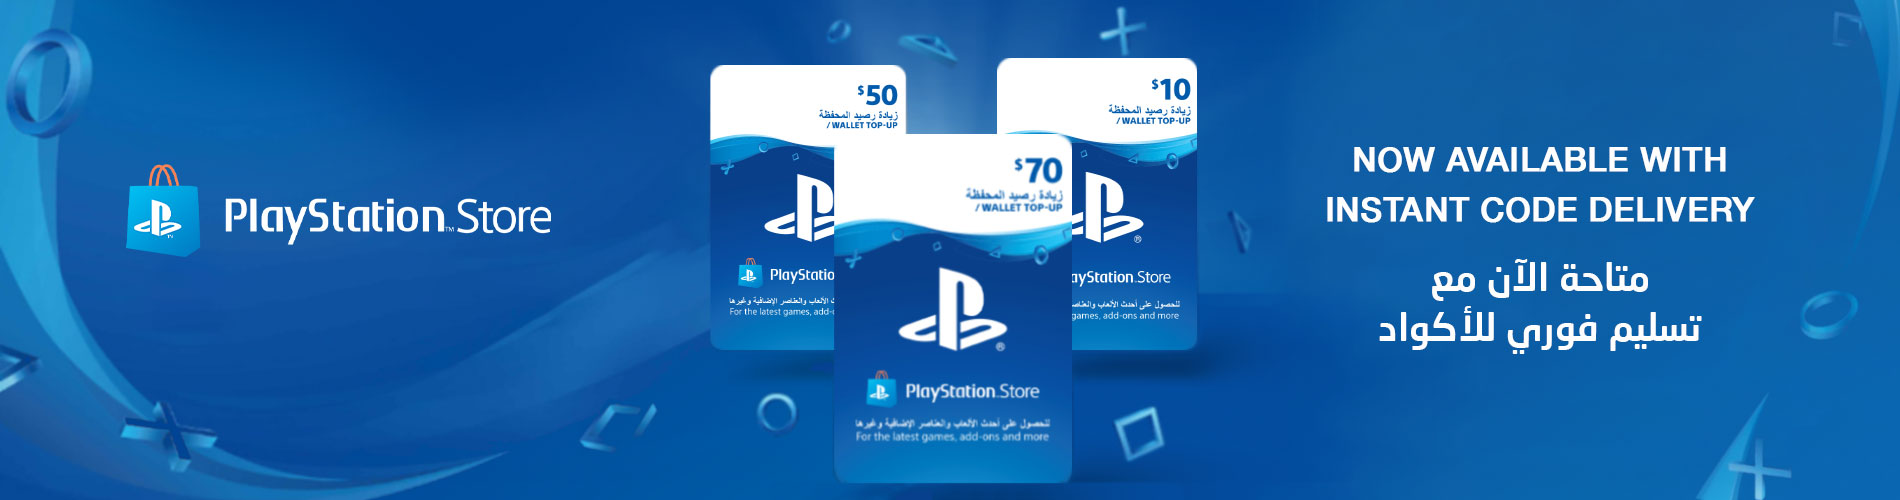 playstation wallet top up online